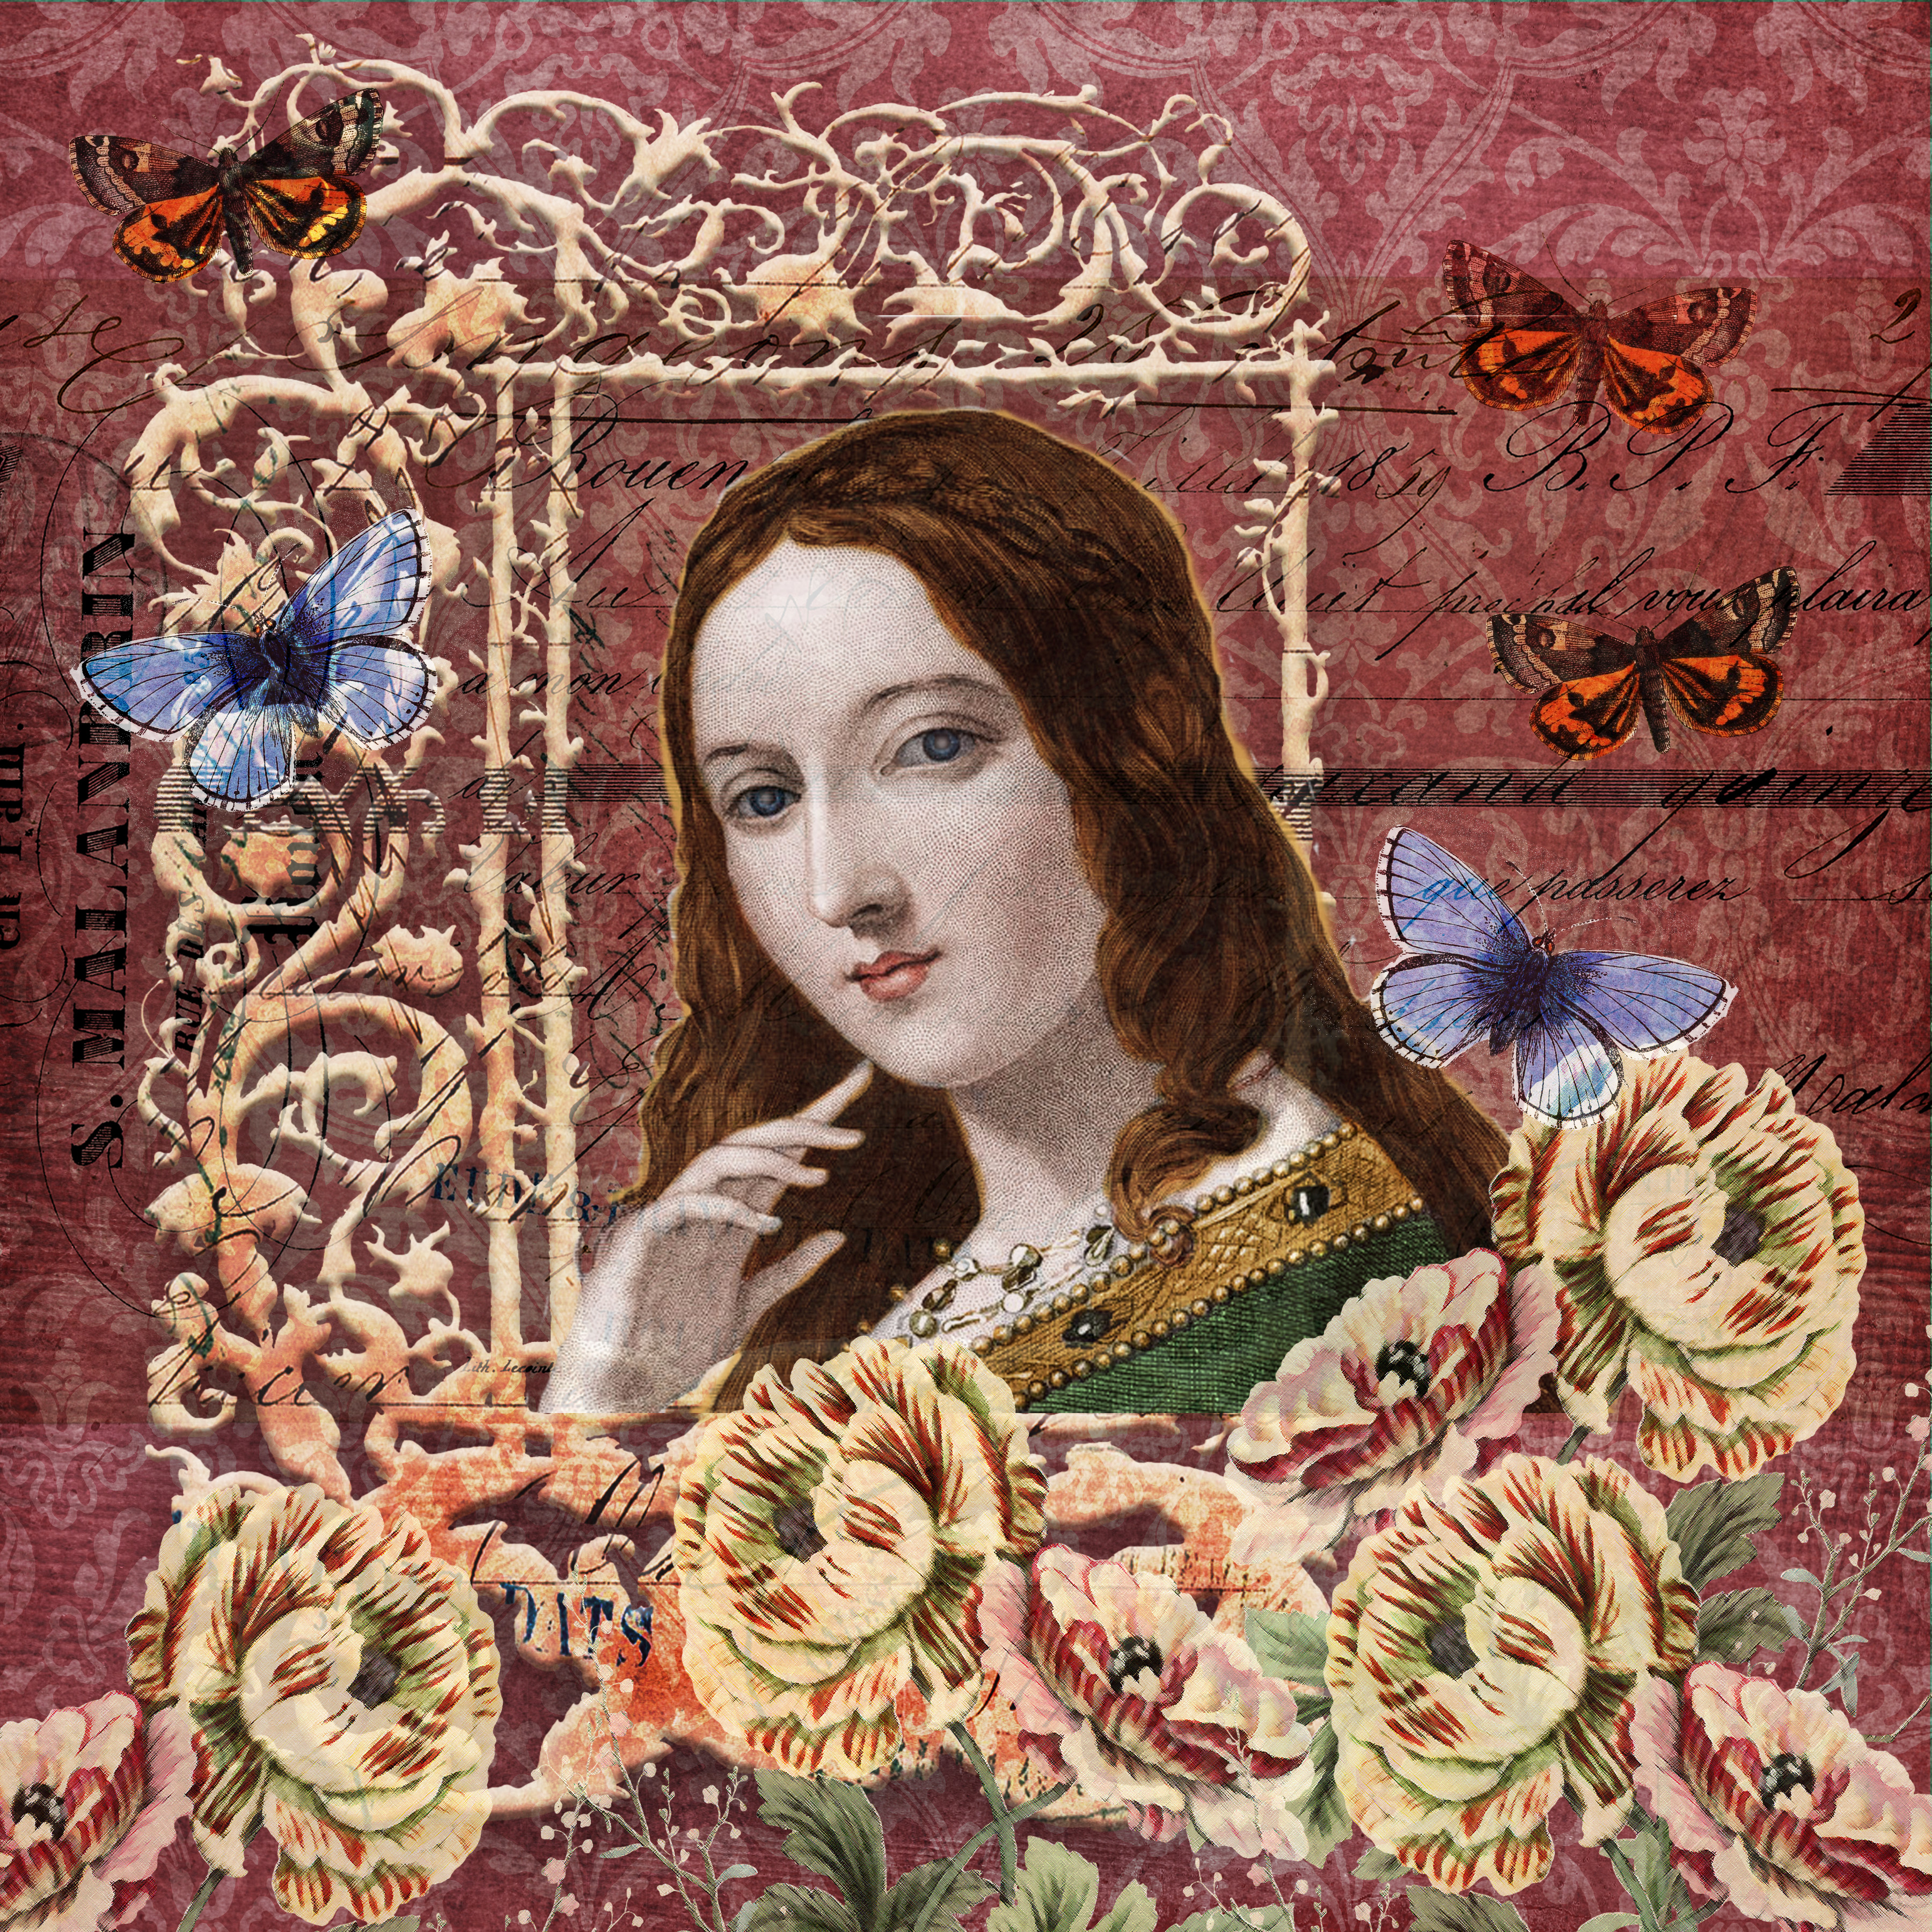 Medieval Beauty Collage - masks, coloring images, textures